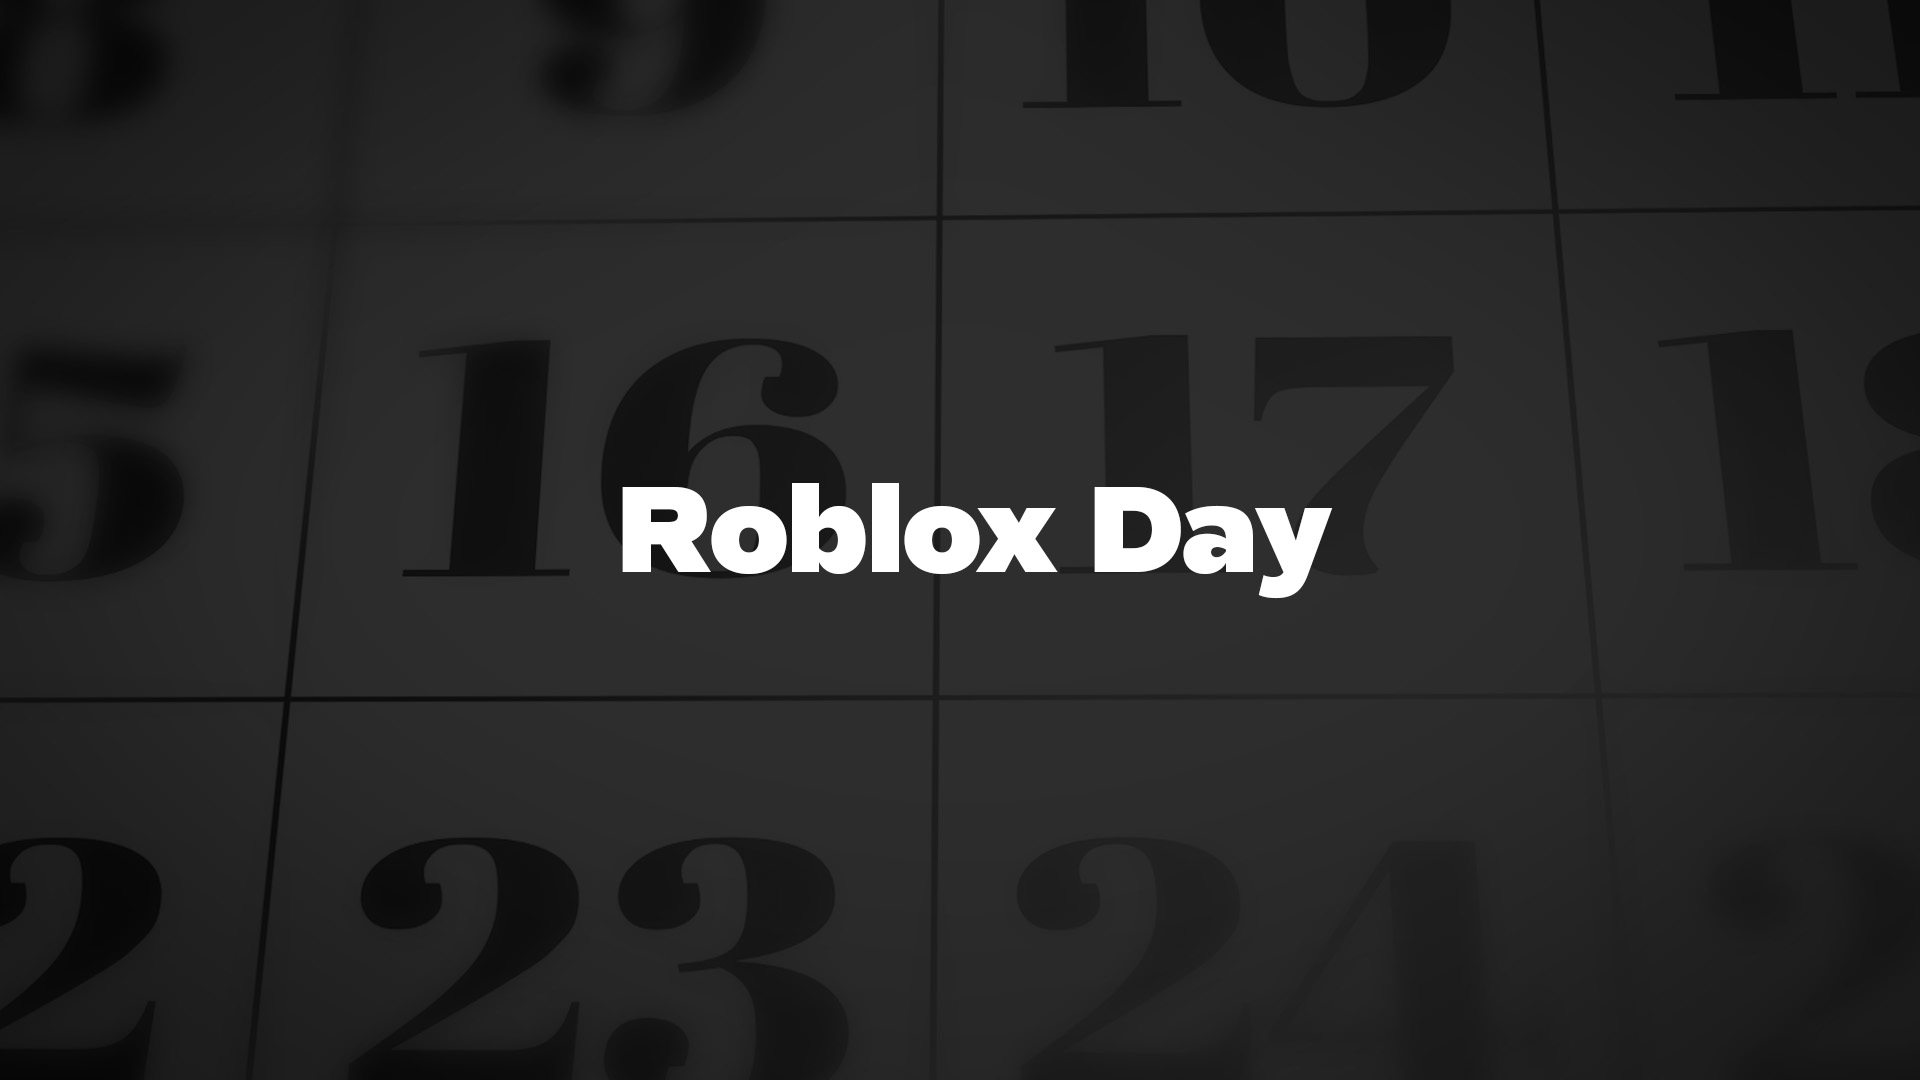 Robuxday com (Sep 2020) Must Watch Video And Know The Facts!